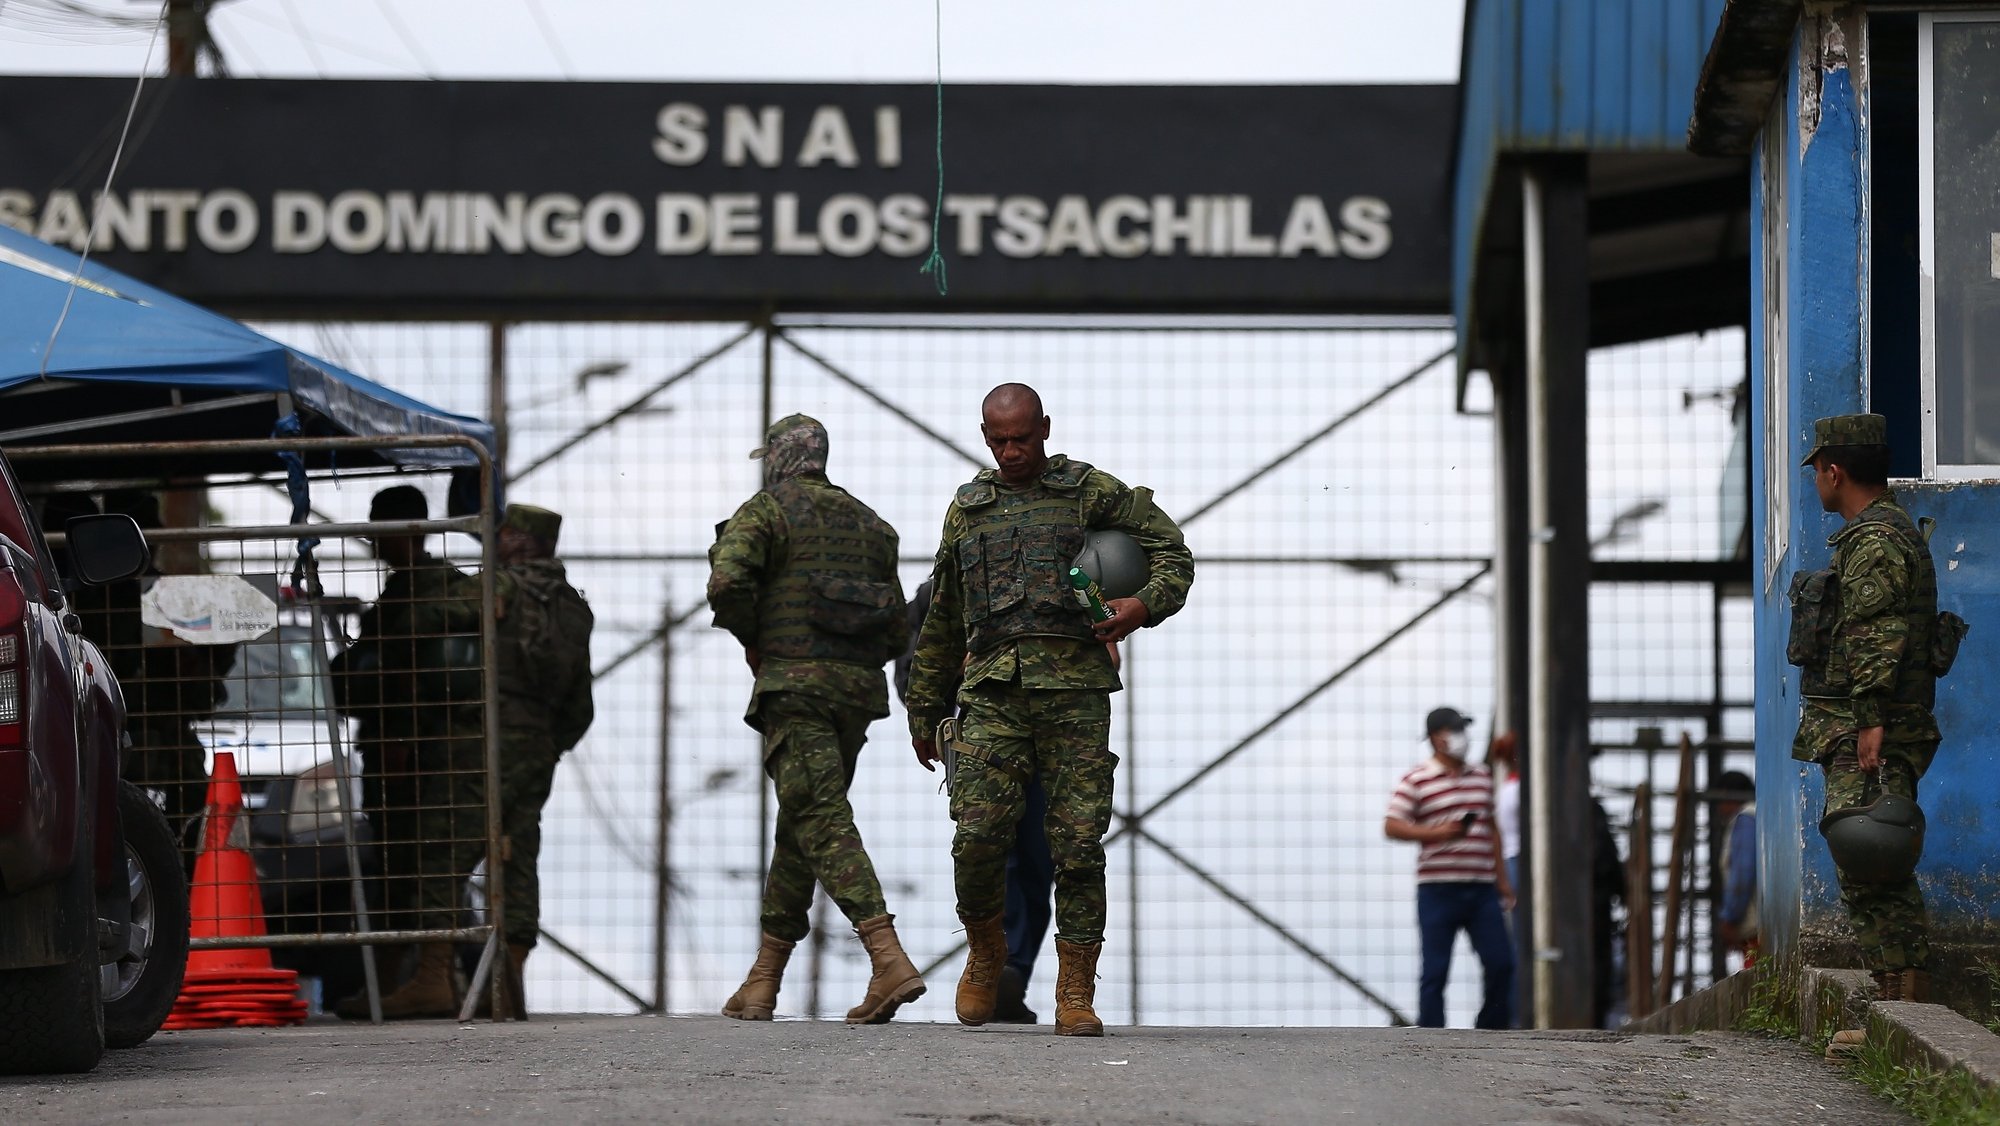 epa09936752 Soldiers guard the prison of Santo Domingo de los Tsachilas, Ecuador, 09 May 2022. At least 43 prisoners died this 09 May in a new riot that occurred in Ecuador, this time in the prison of the city of Santo Domingo de los Tsachilas (center), according to a tweet by Ecuador&#039;s public prosecutor&#039;s office.  EPA/Jose Jacome